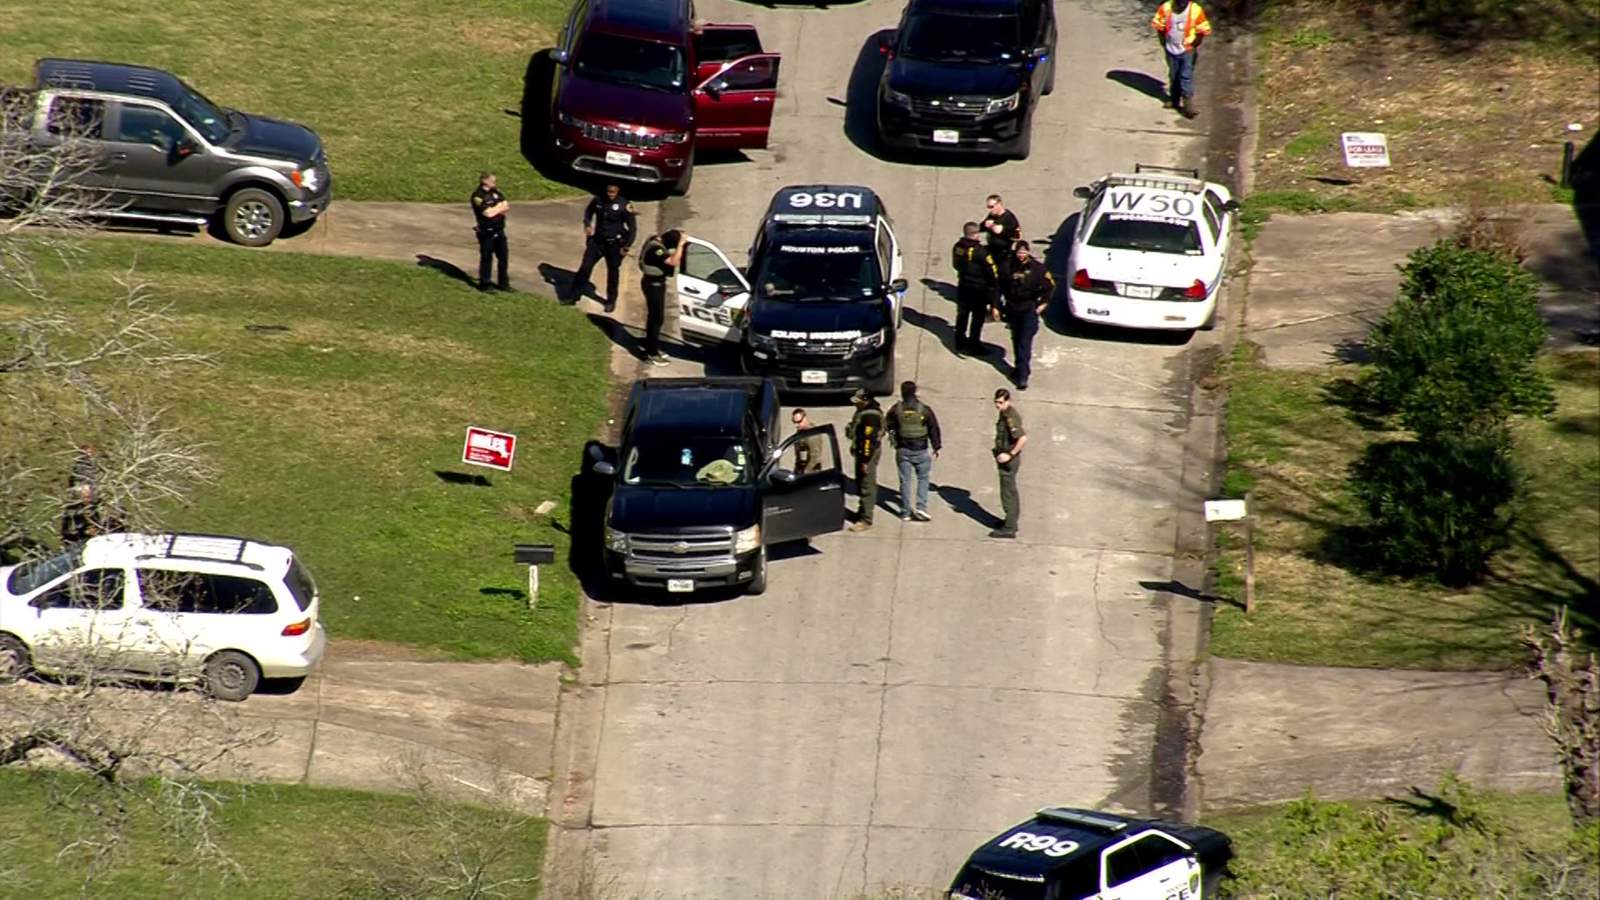 Chase ends in northeast Houston, officials say